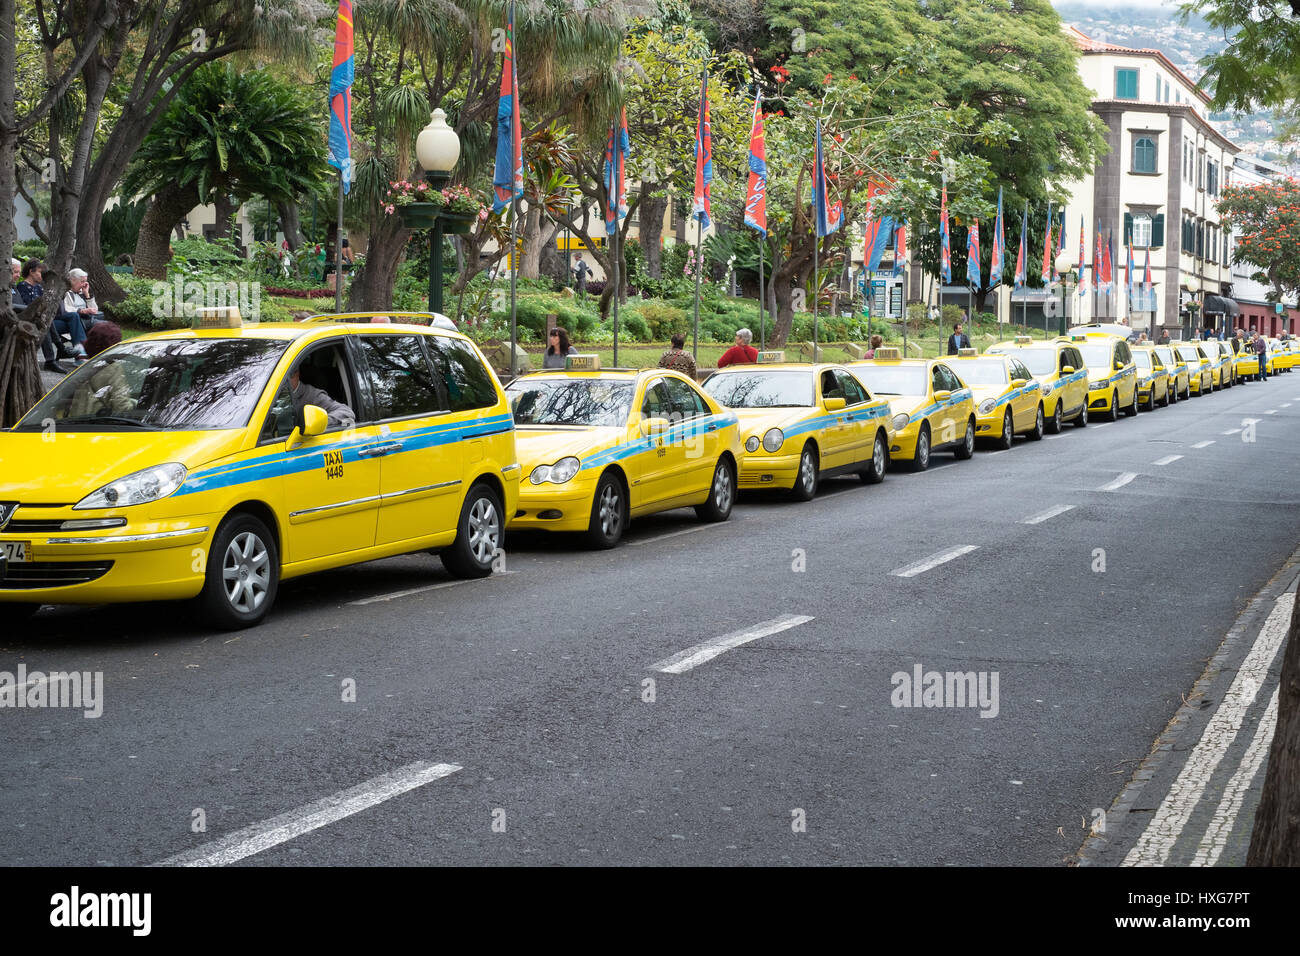 Yellow taxis at a taxi rank Funchal, Madeira Stock Photo